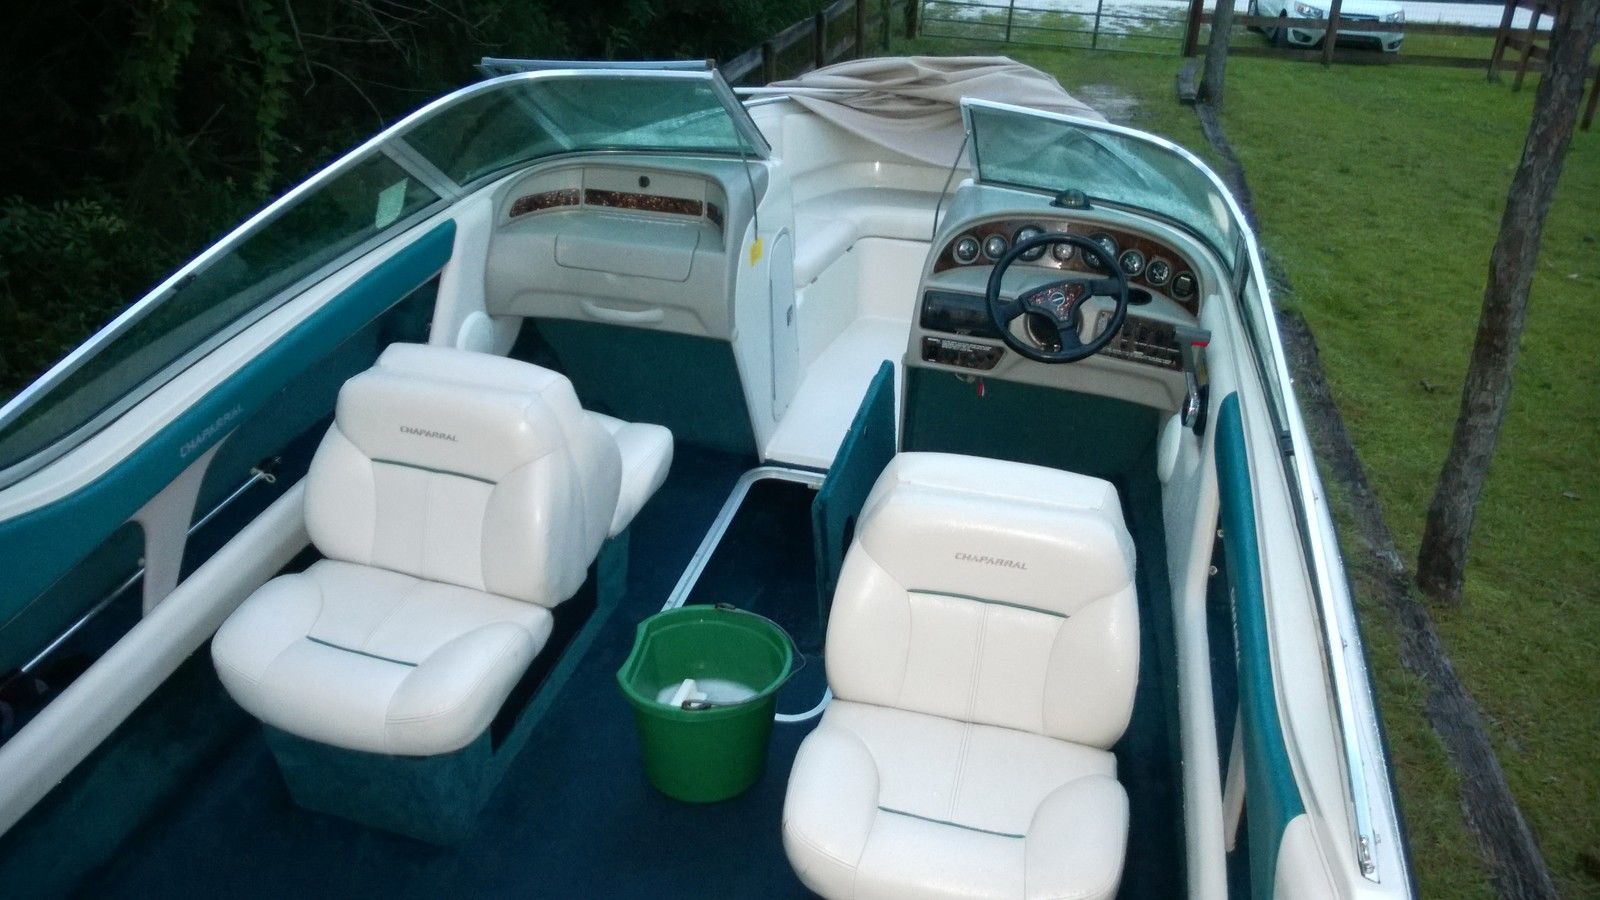 Chaparral 2130 SS 1995 for sale for $12,900 - Boats-from-USA.com